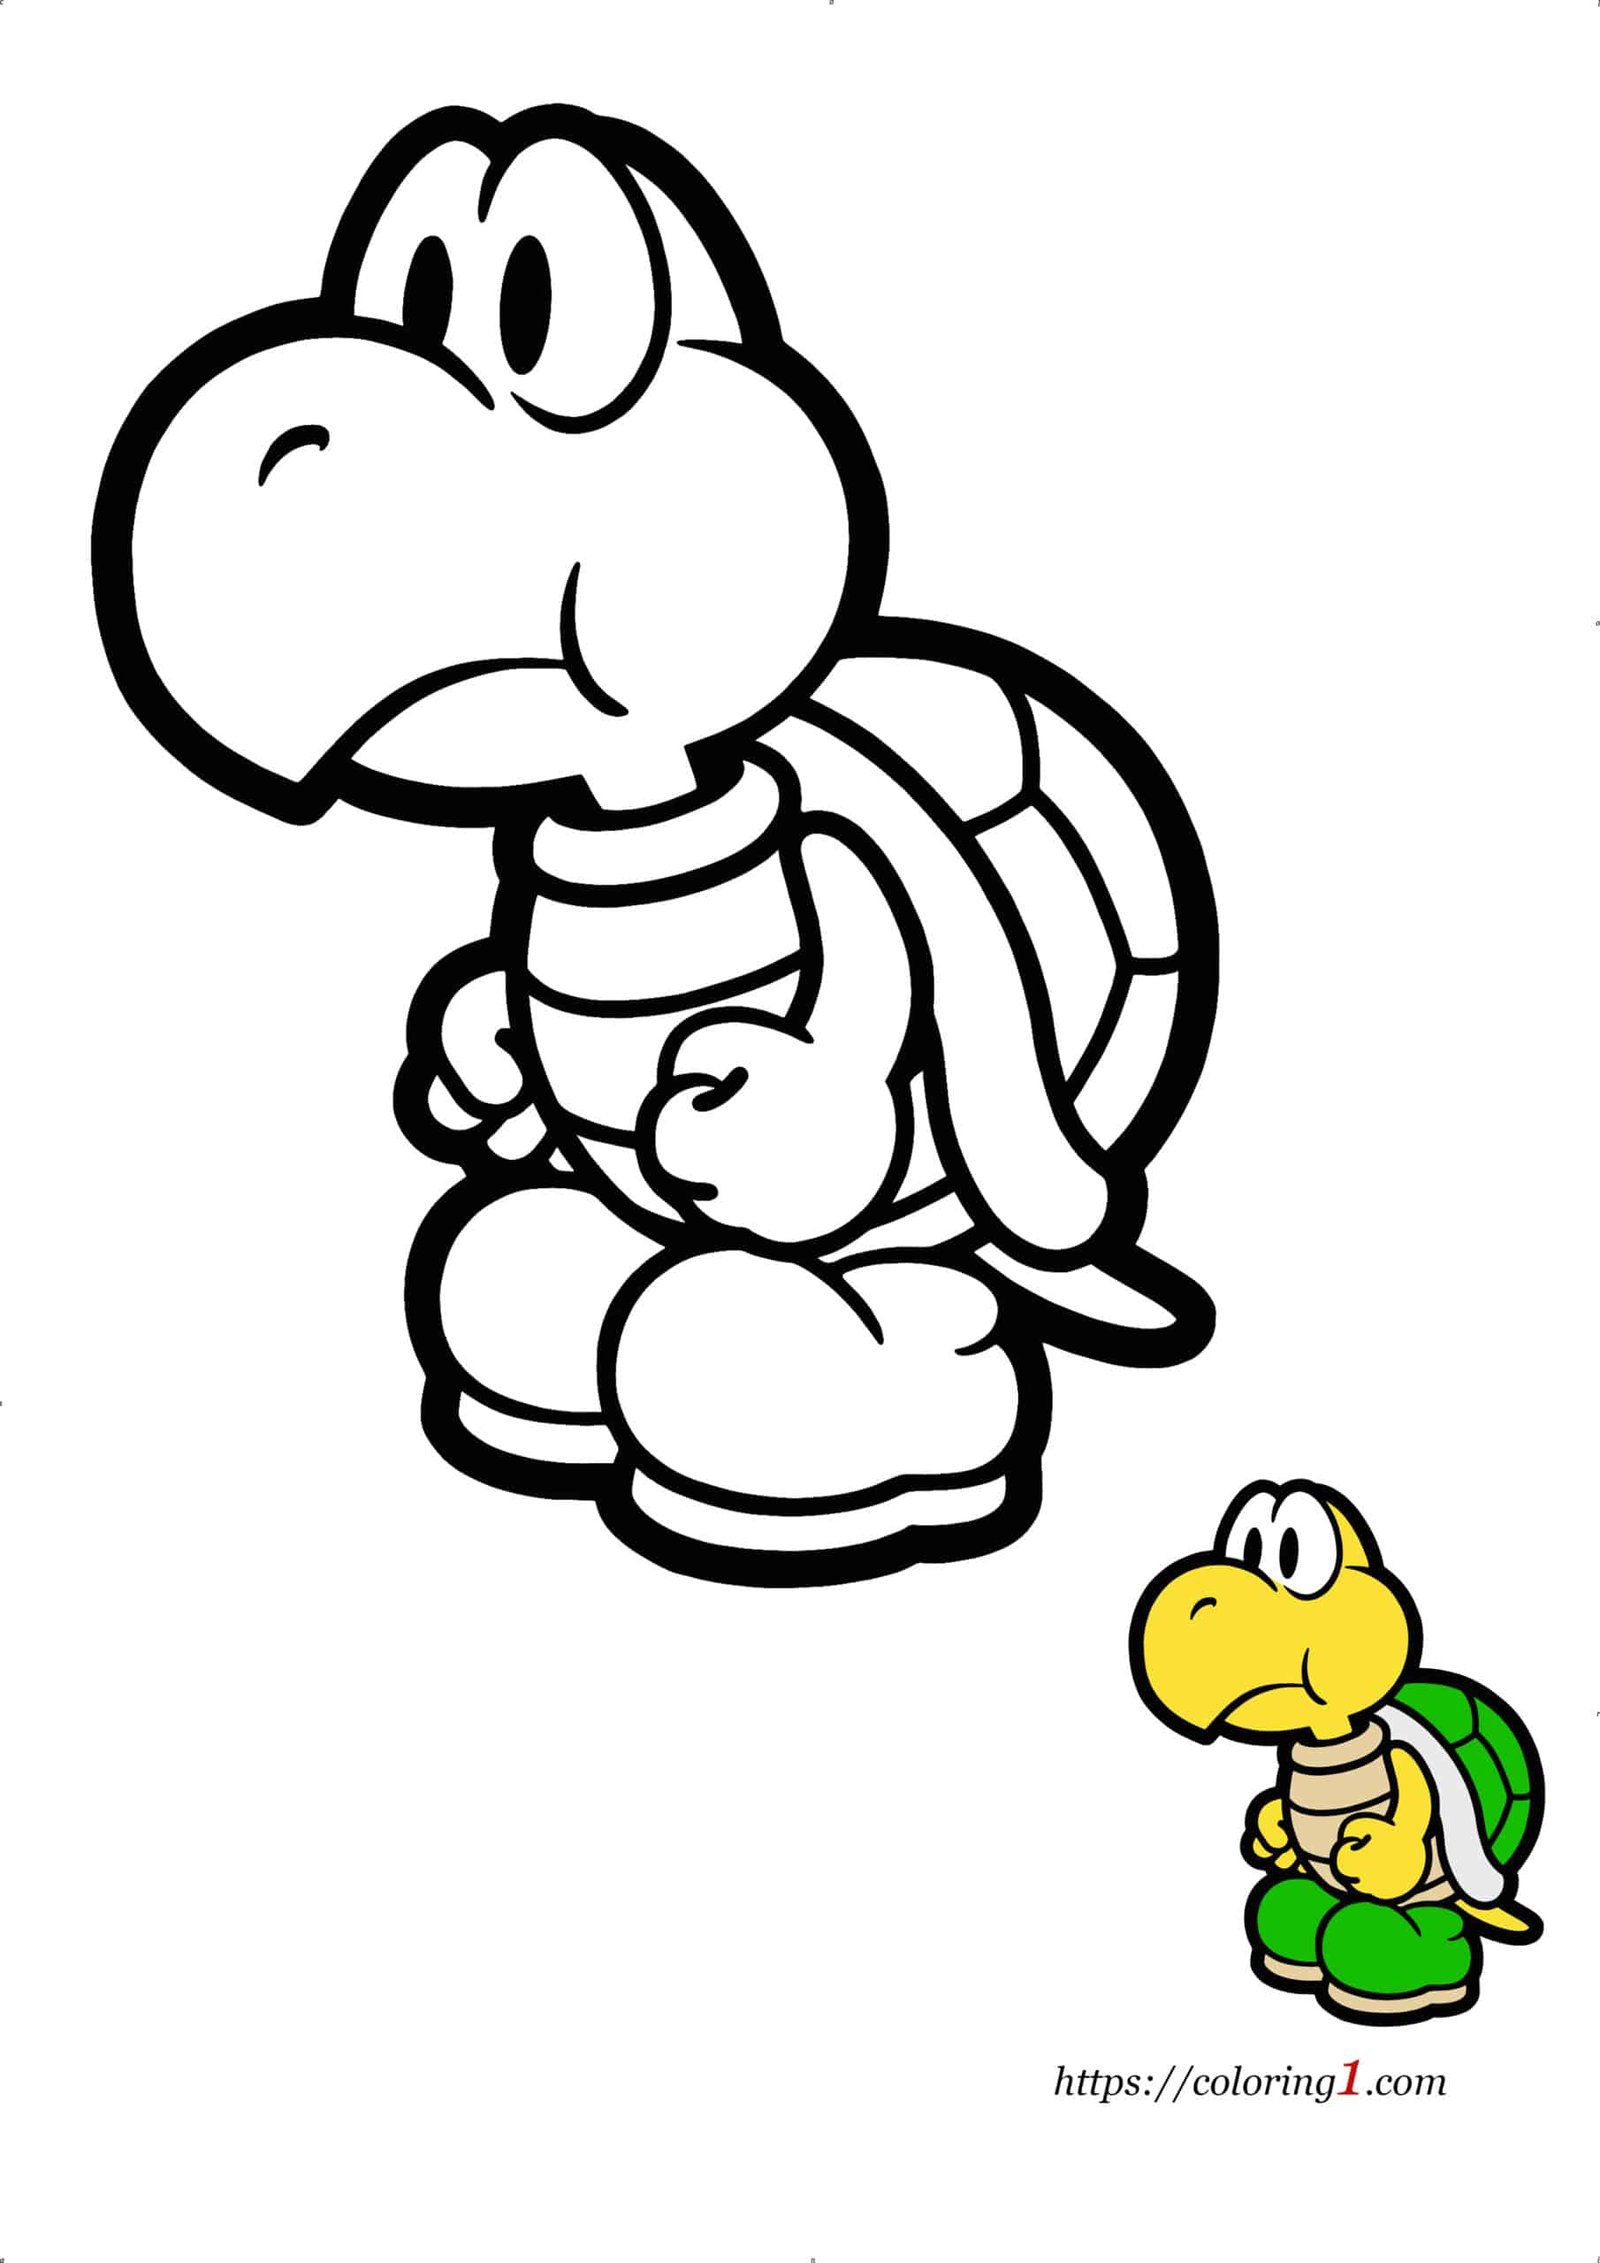 Mario Turtle Koopa Troopa coloring page for kids with sample